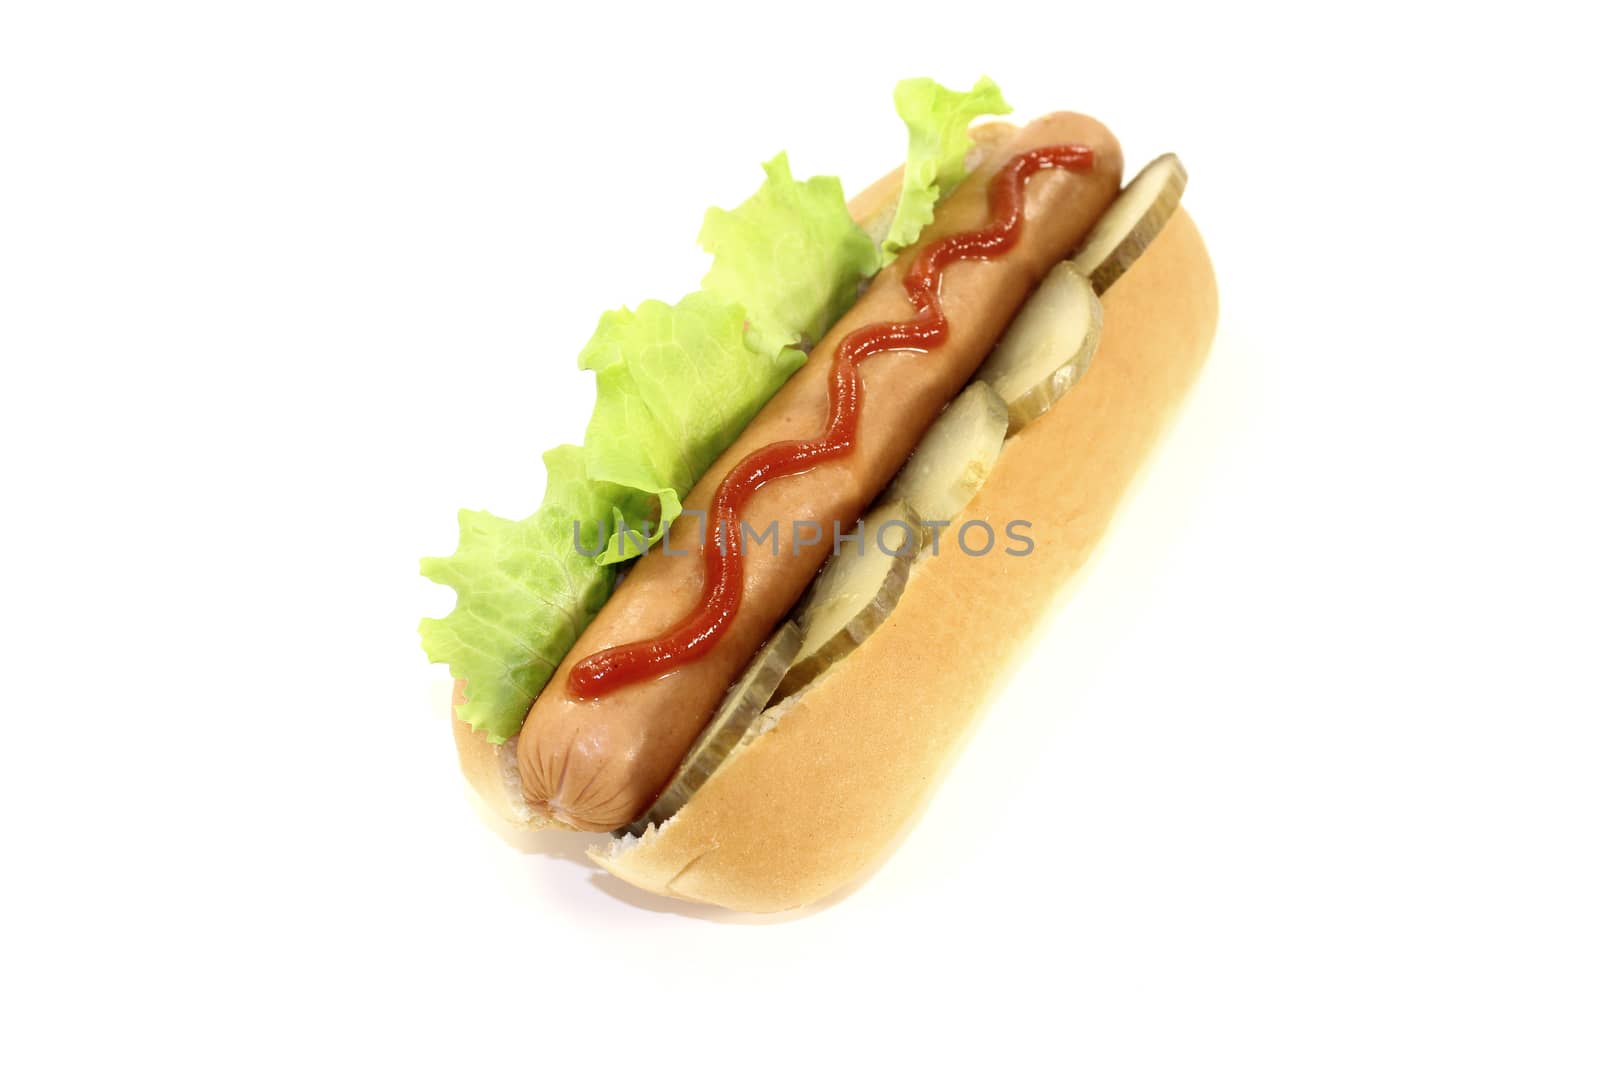 Hot dog with ketchup by discovery